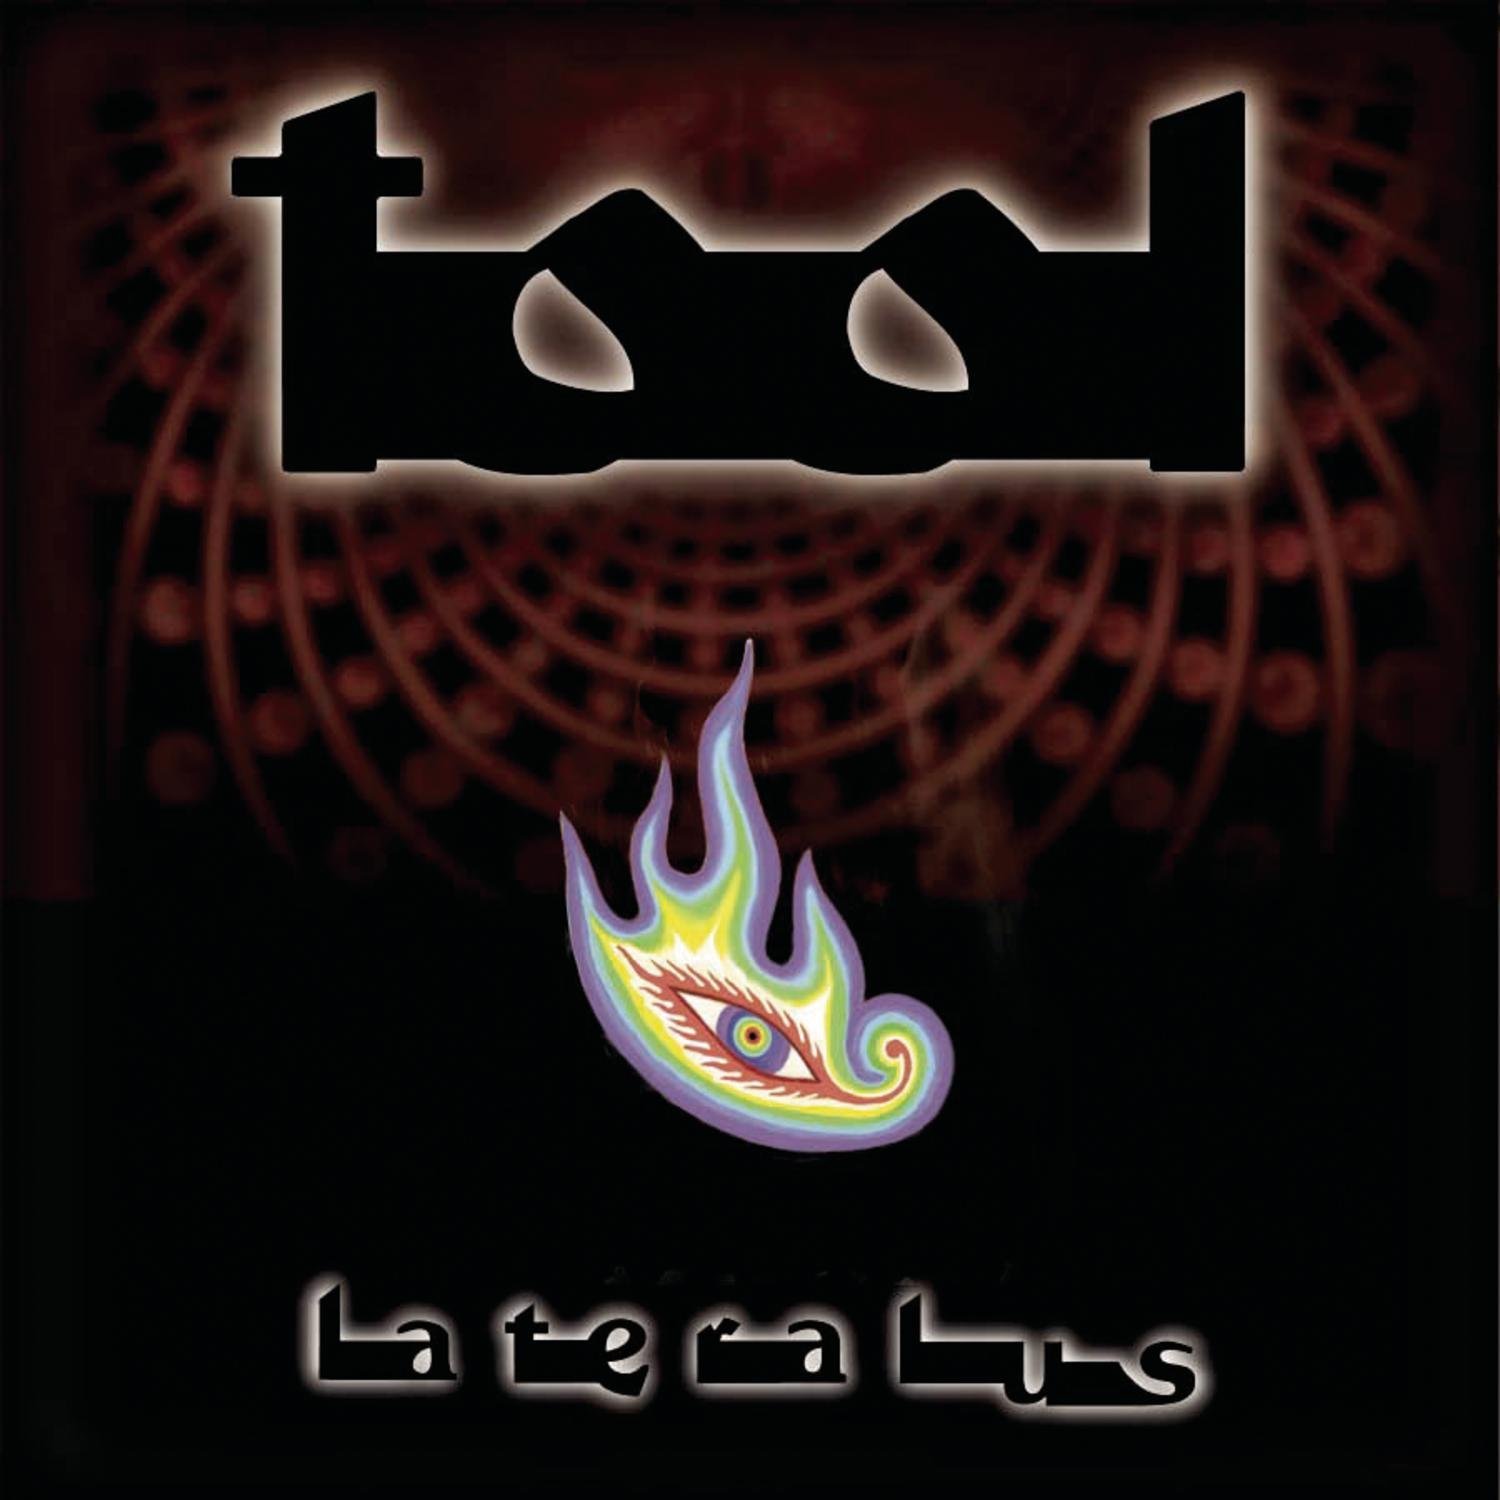 「Schism」収録アルバム『LATERALUS』／TOOL